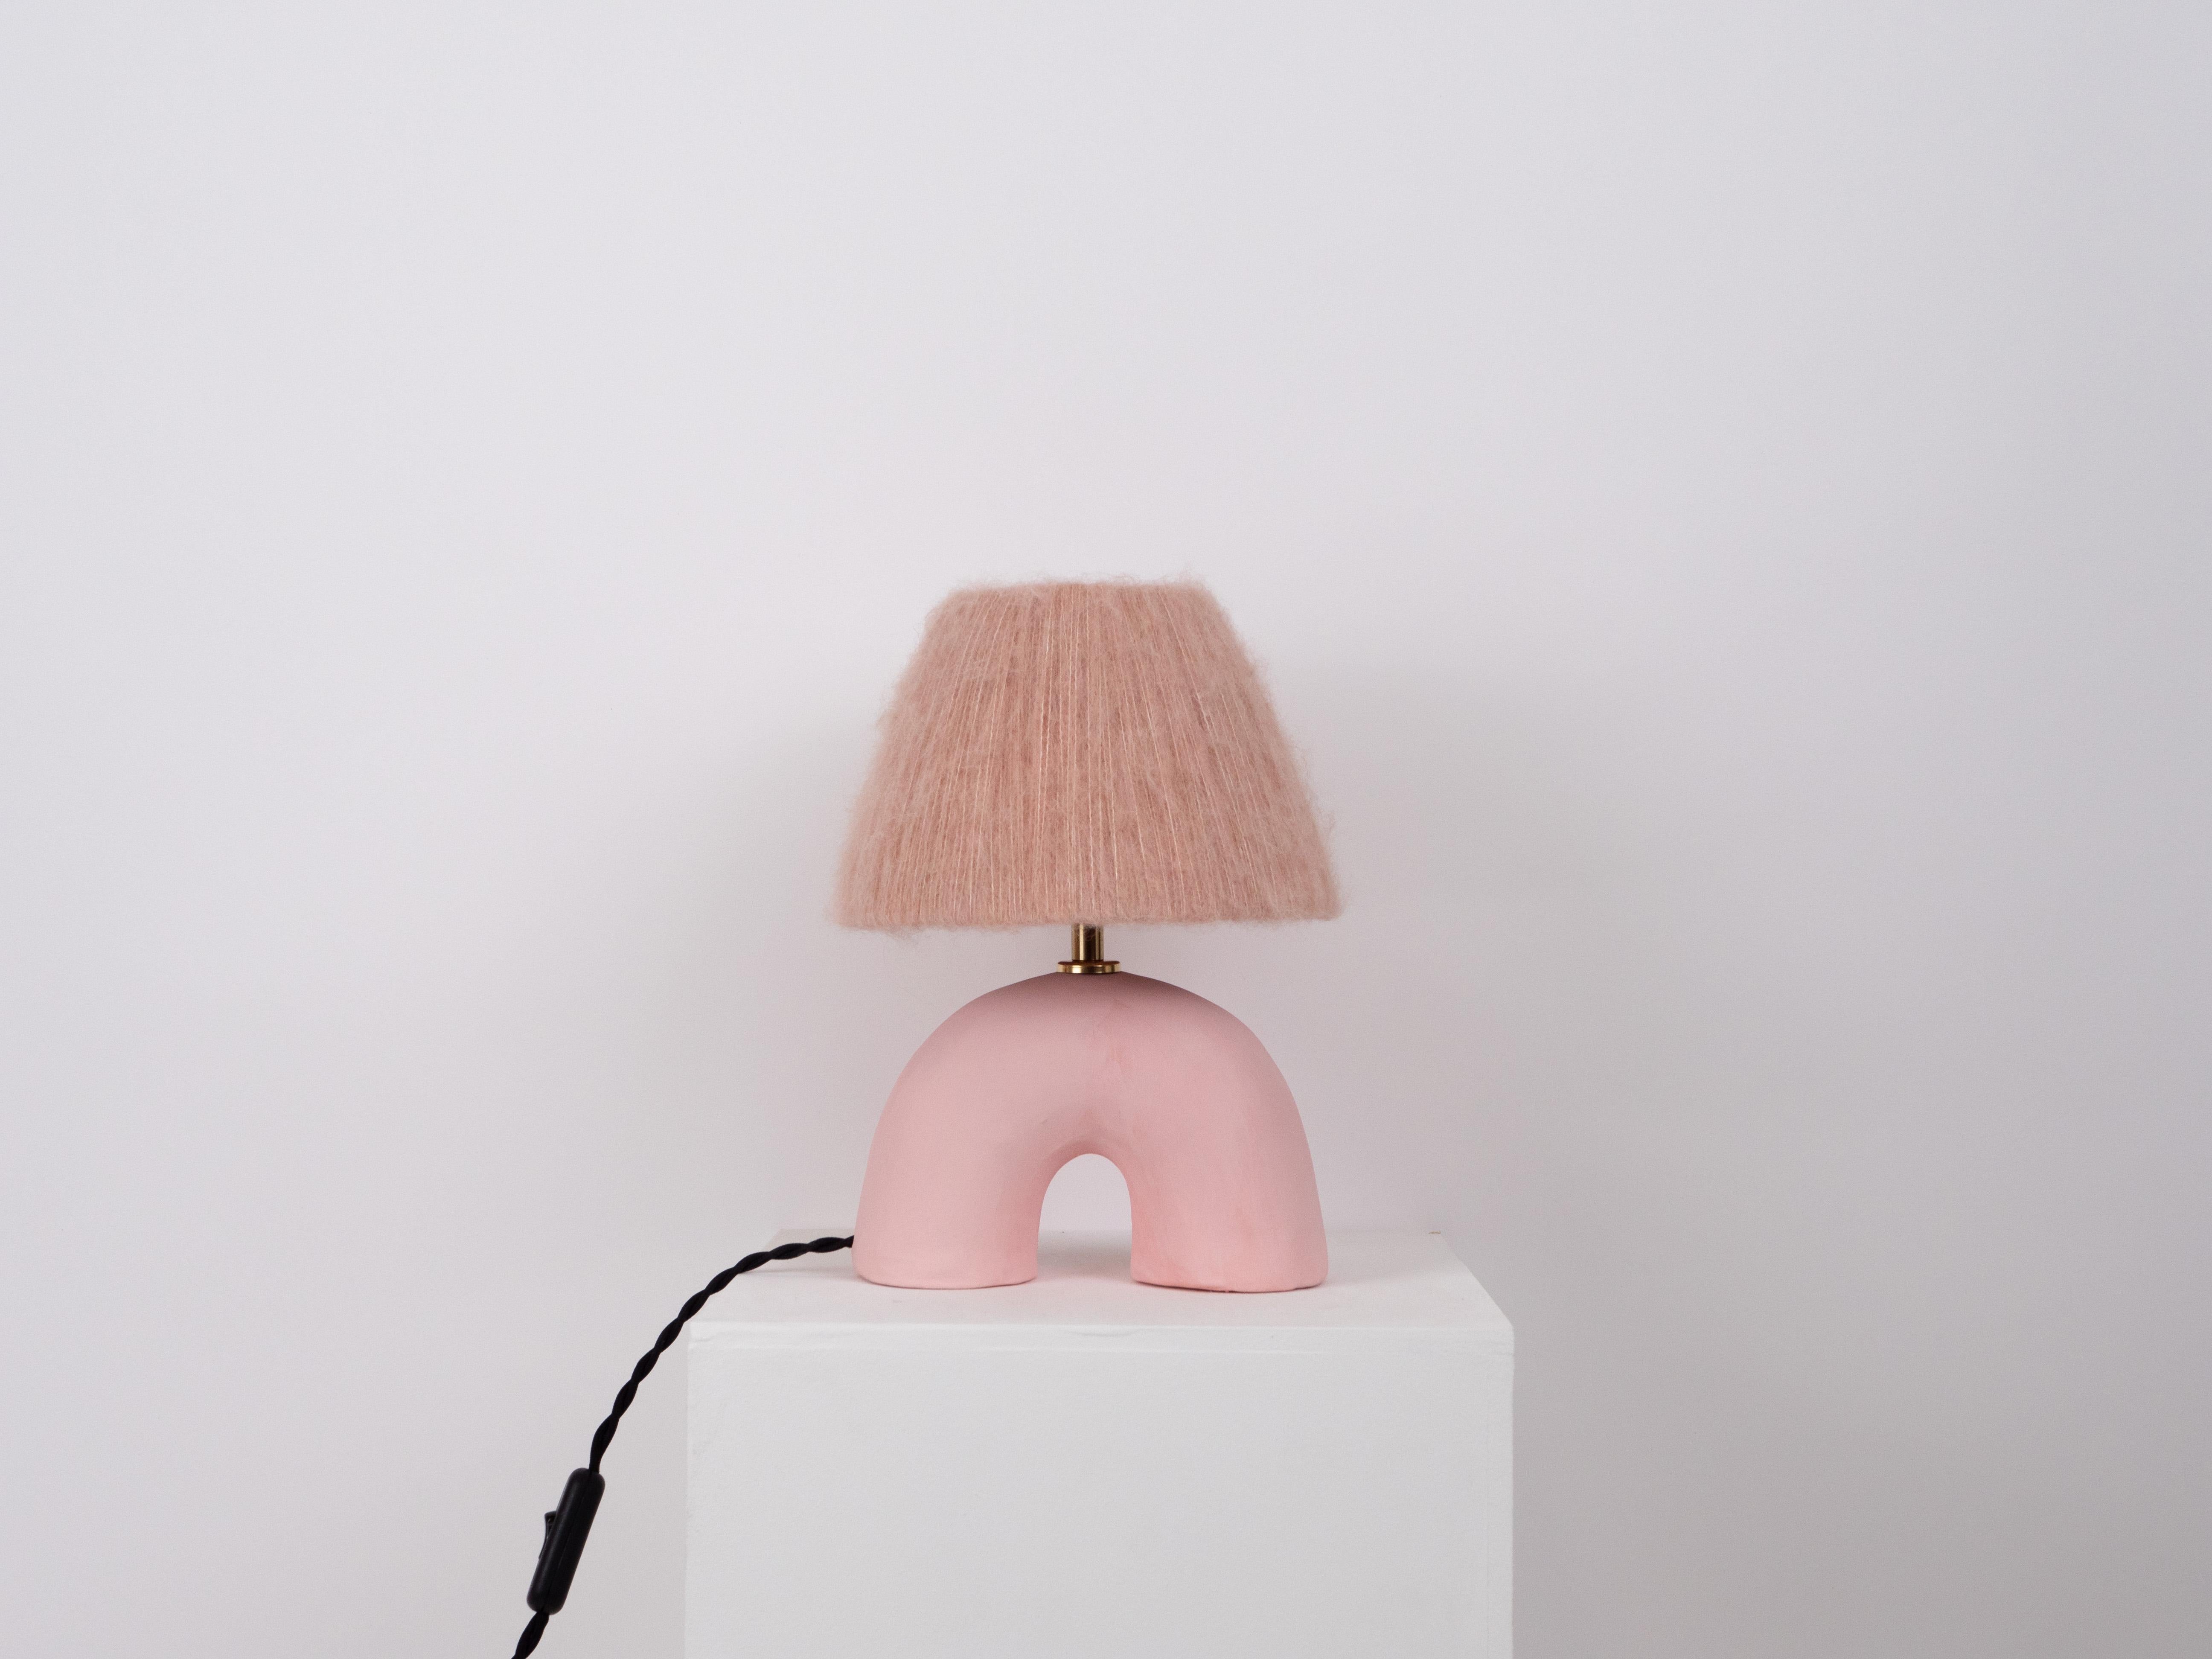 Pink matte finish lamp with mohair shade

Estimated processing time is 2 weeks from order confirmation

Pictured with a Mini Globe LED E27 Bulb. Bulb not included

To pair this base with a shade in an alternative colour or Material, click the